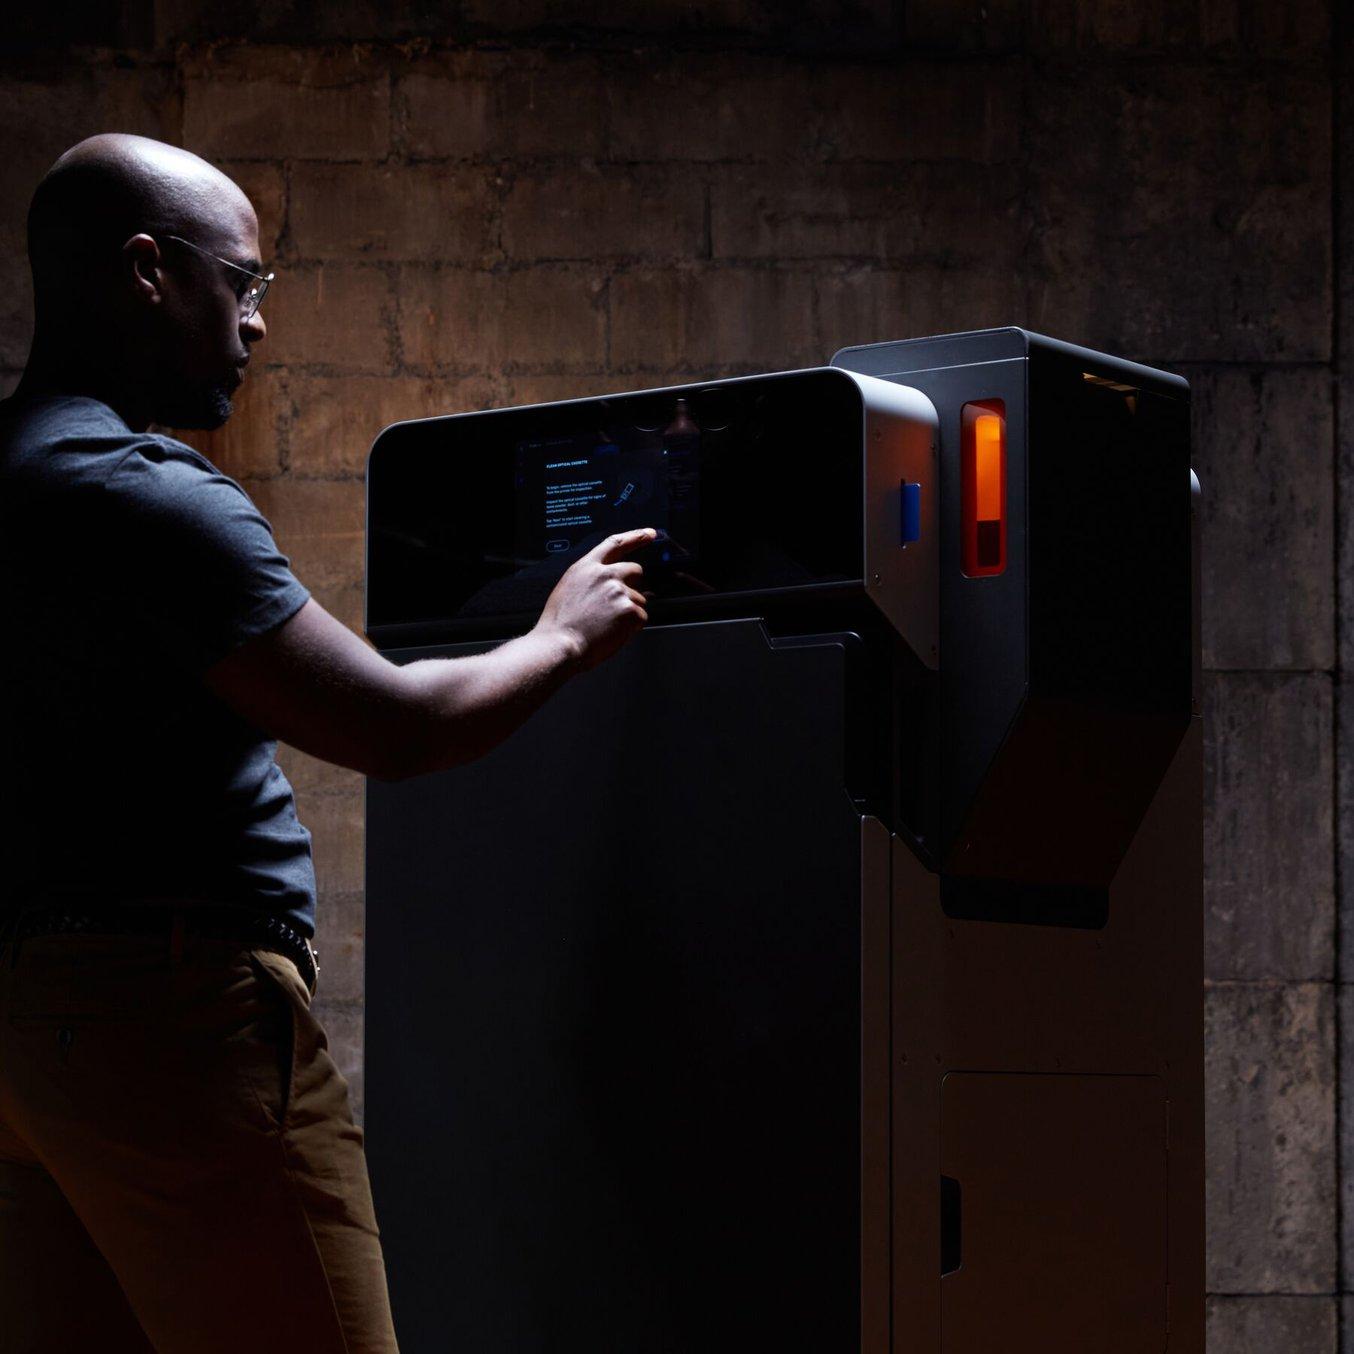 Outsourcing vs. In-House: When Does it Make Sense to Bring SLS 3D Printing In-House?